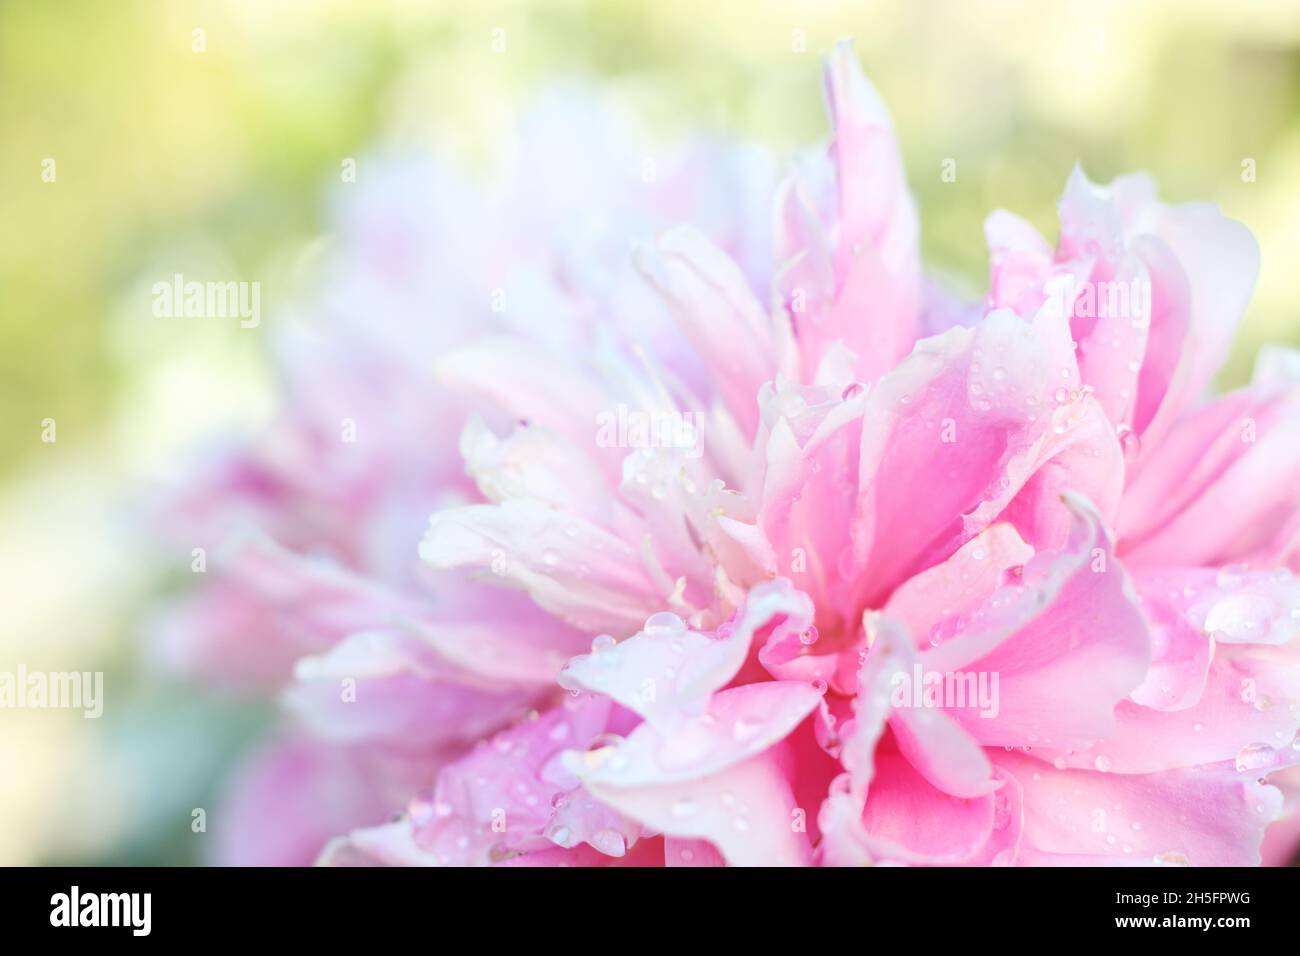 Close-up view of pink blossom flower named as peony with raindrops on green blurred background. Soft focus. Stock Photo